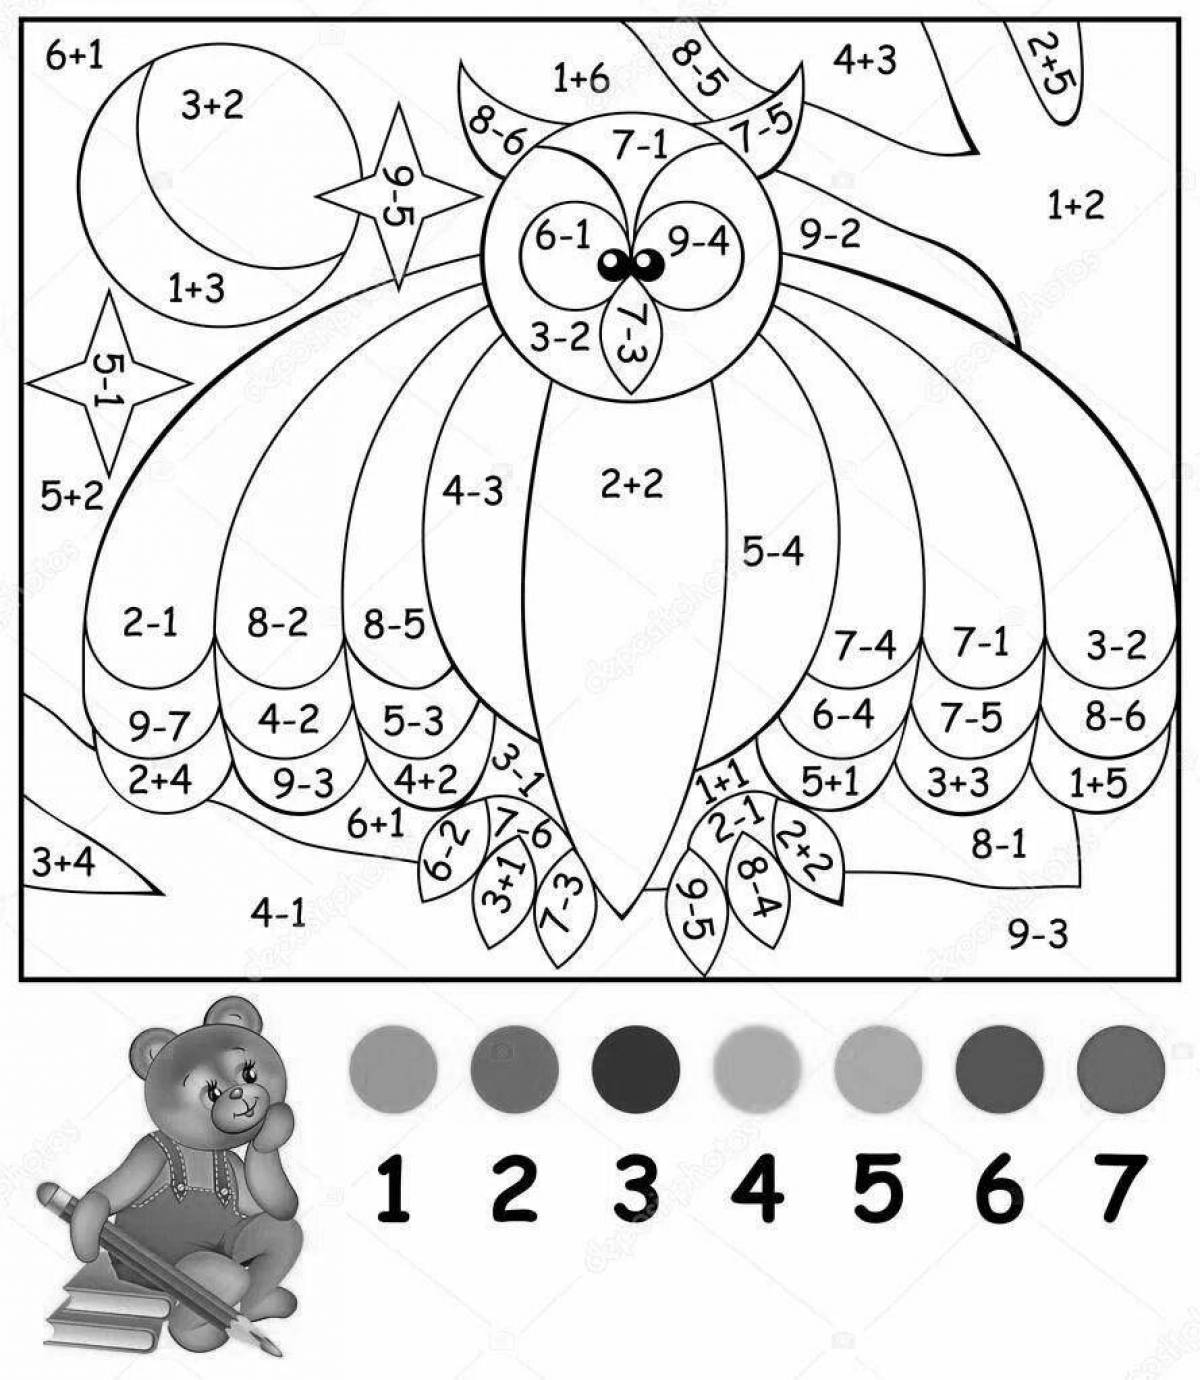 Creative math coloring book for preschoolers 6-7 years old